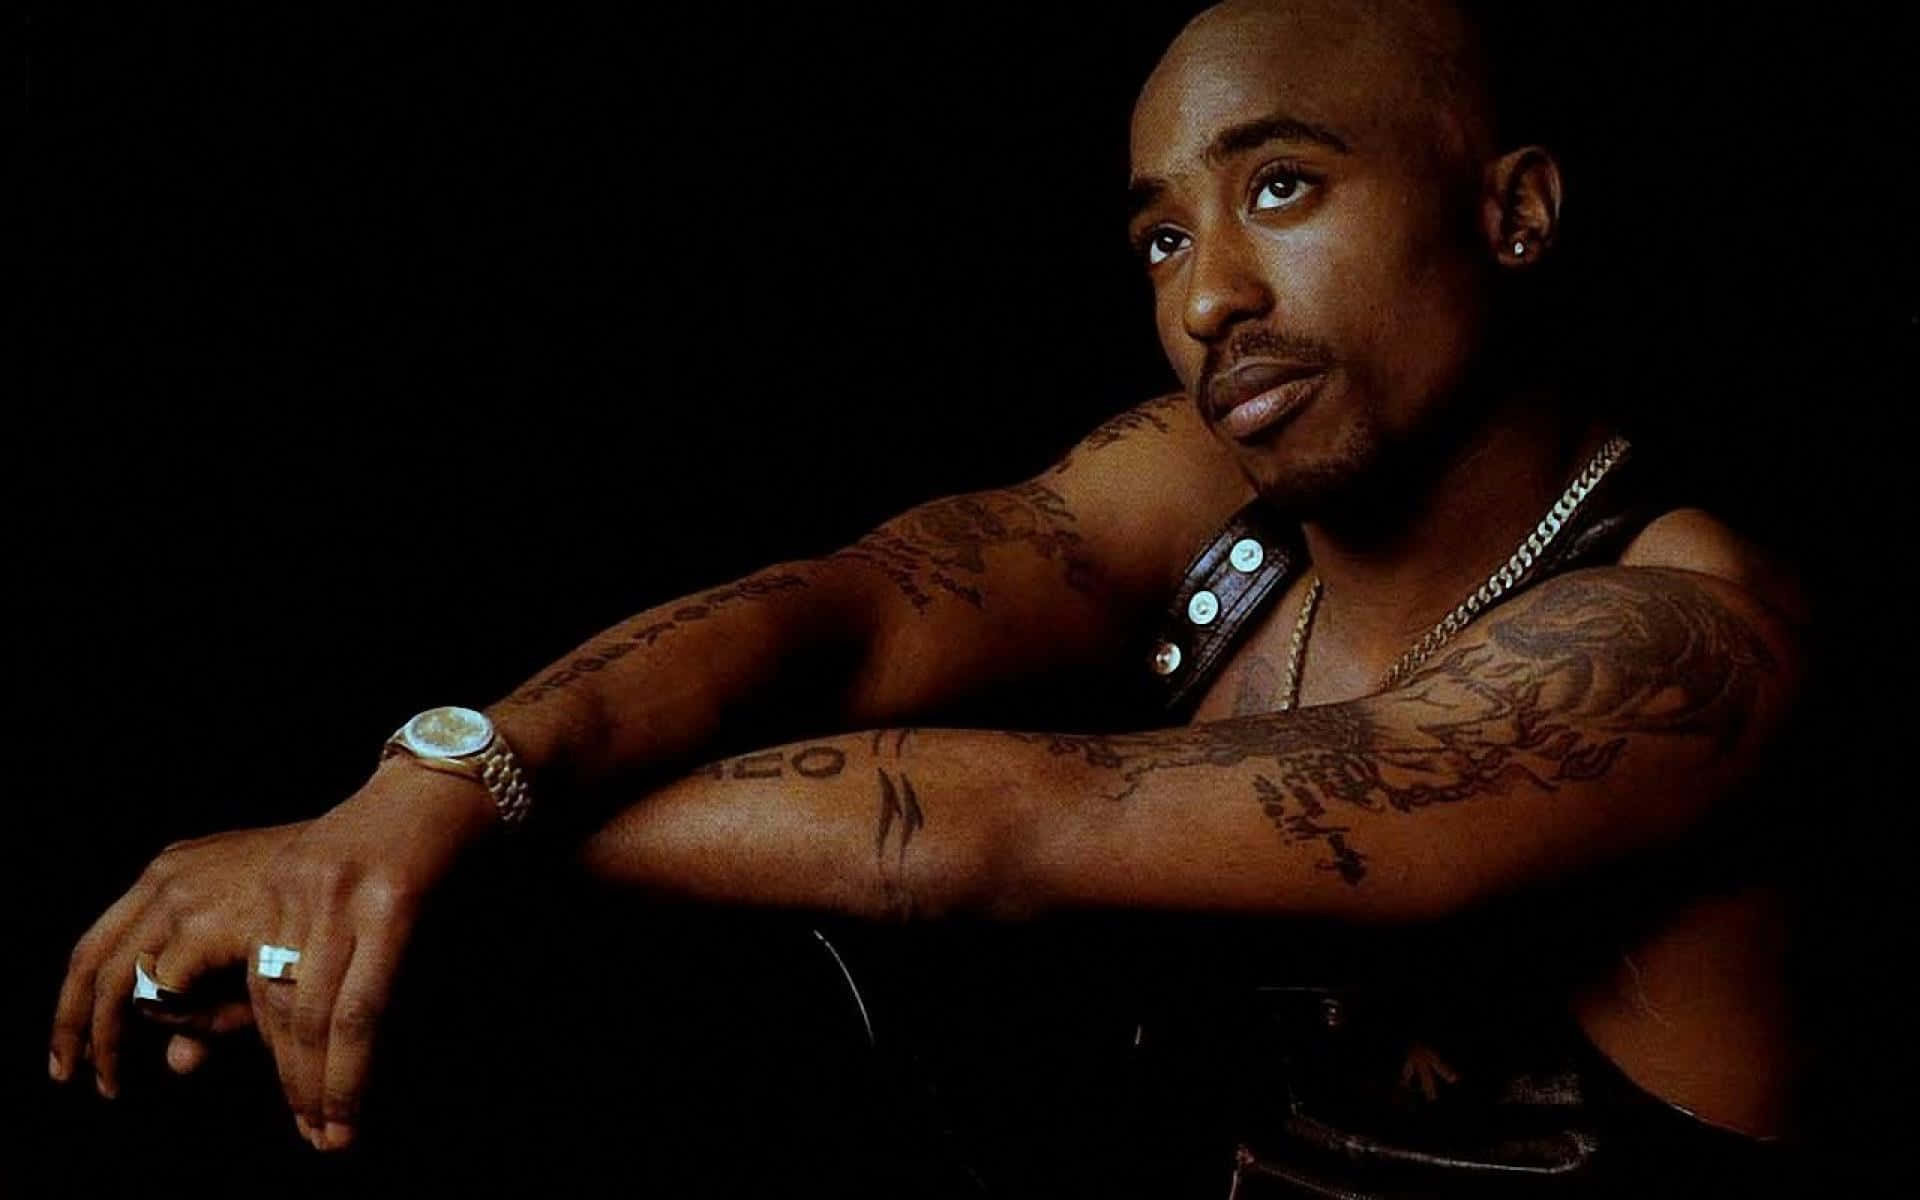 An iconic portrait of Tupac Shakur, legendary rapper and actor